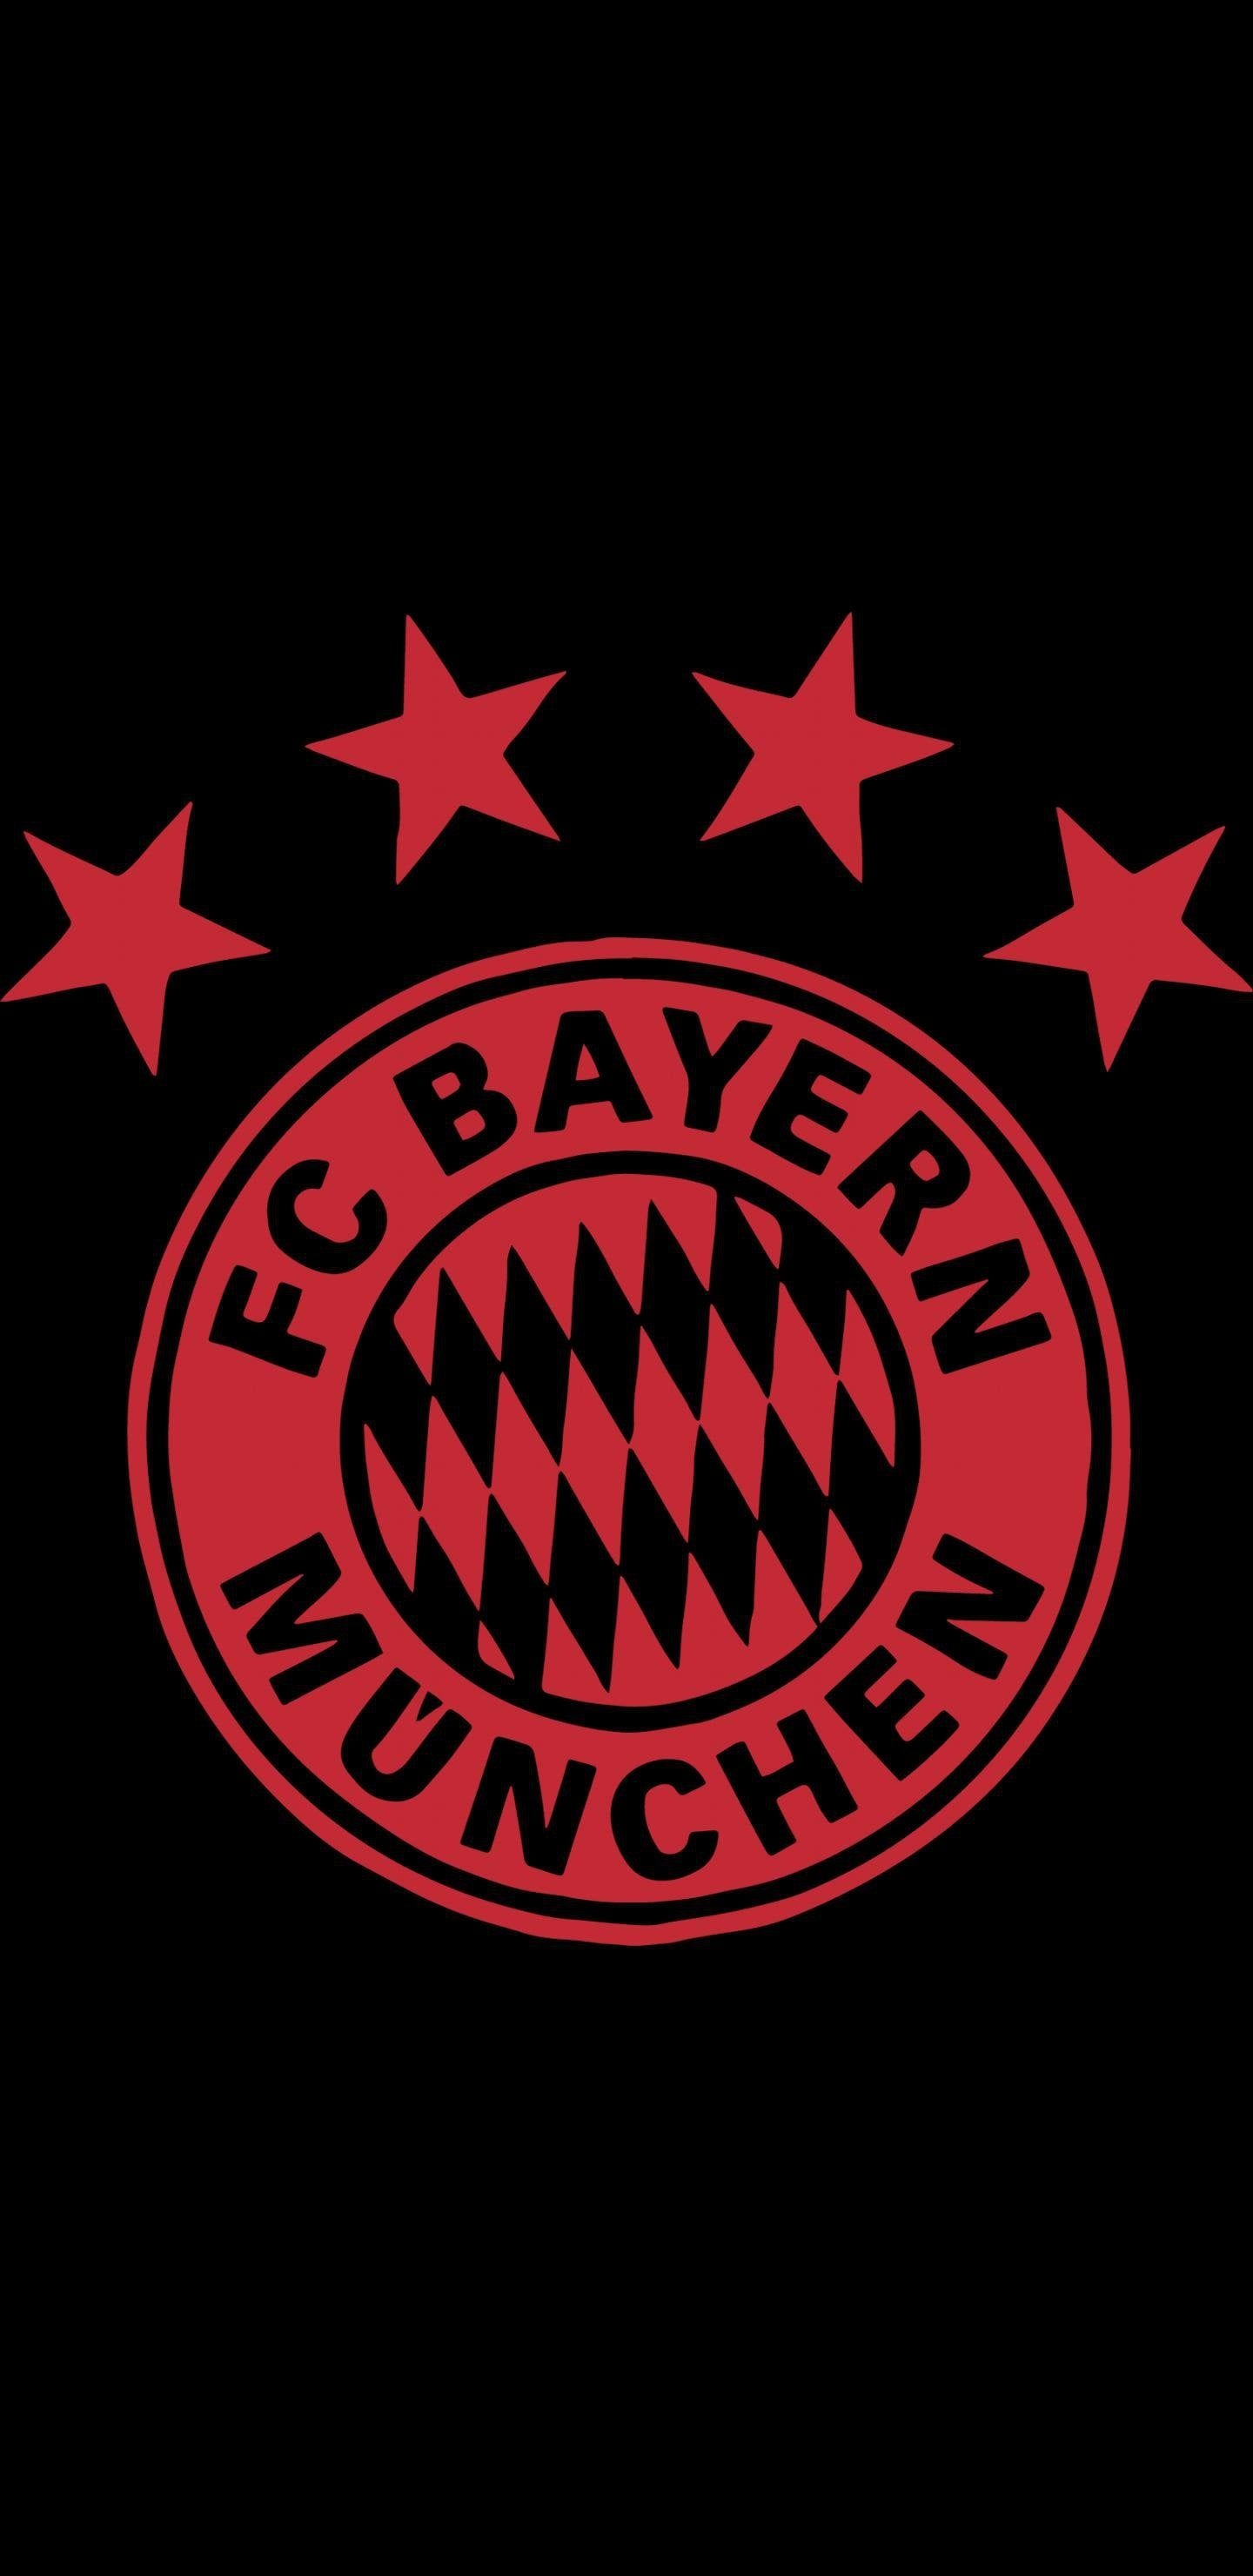 Bayern Munchen FC: The inaugural season of the Bundesliga in 1963, Dominant club achieving 31 championship titles. 1440x2960 HD Background.